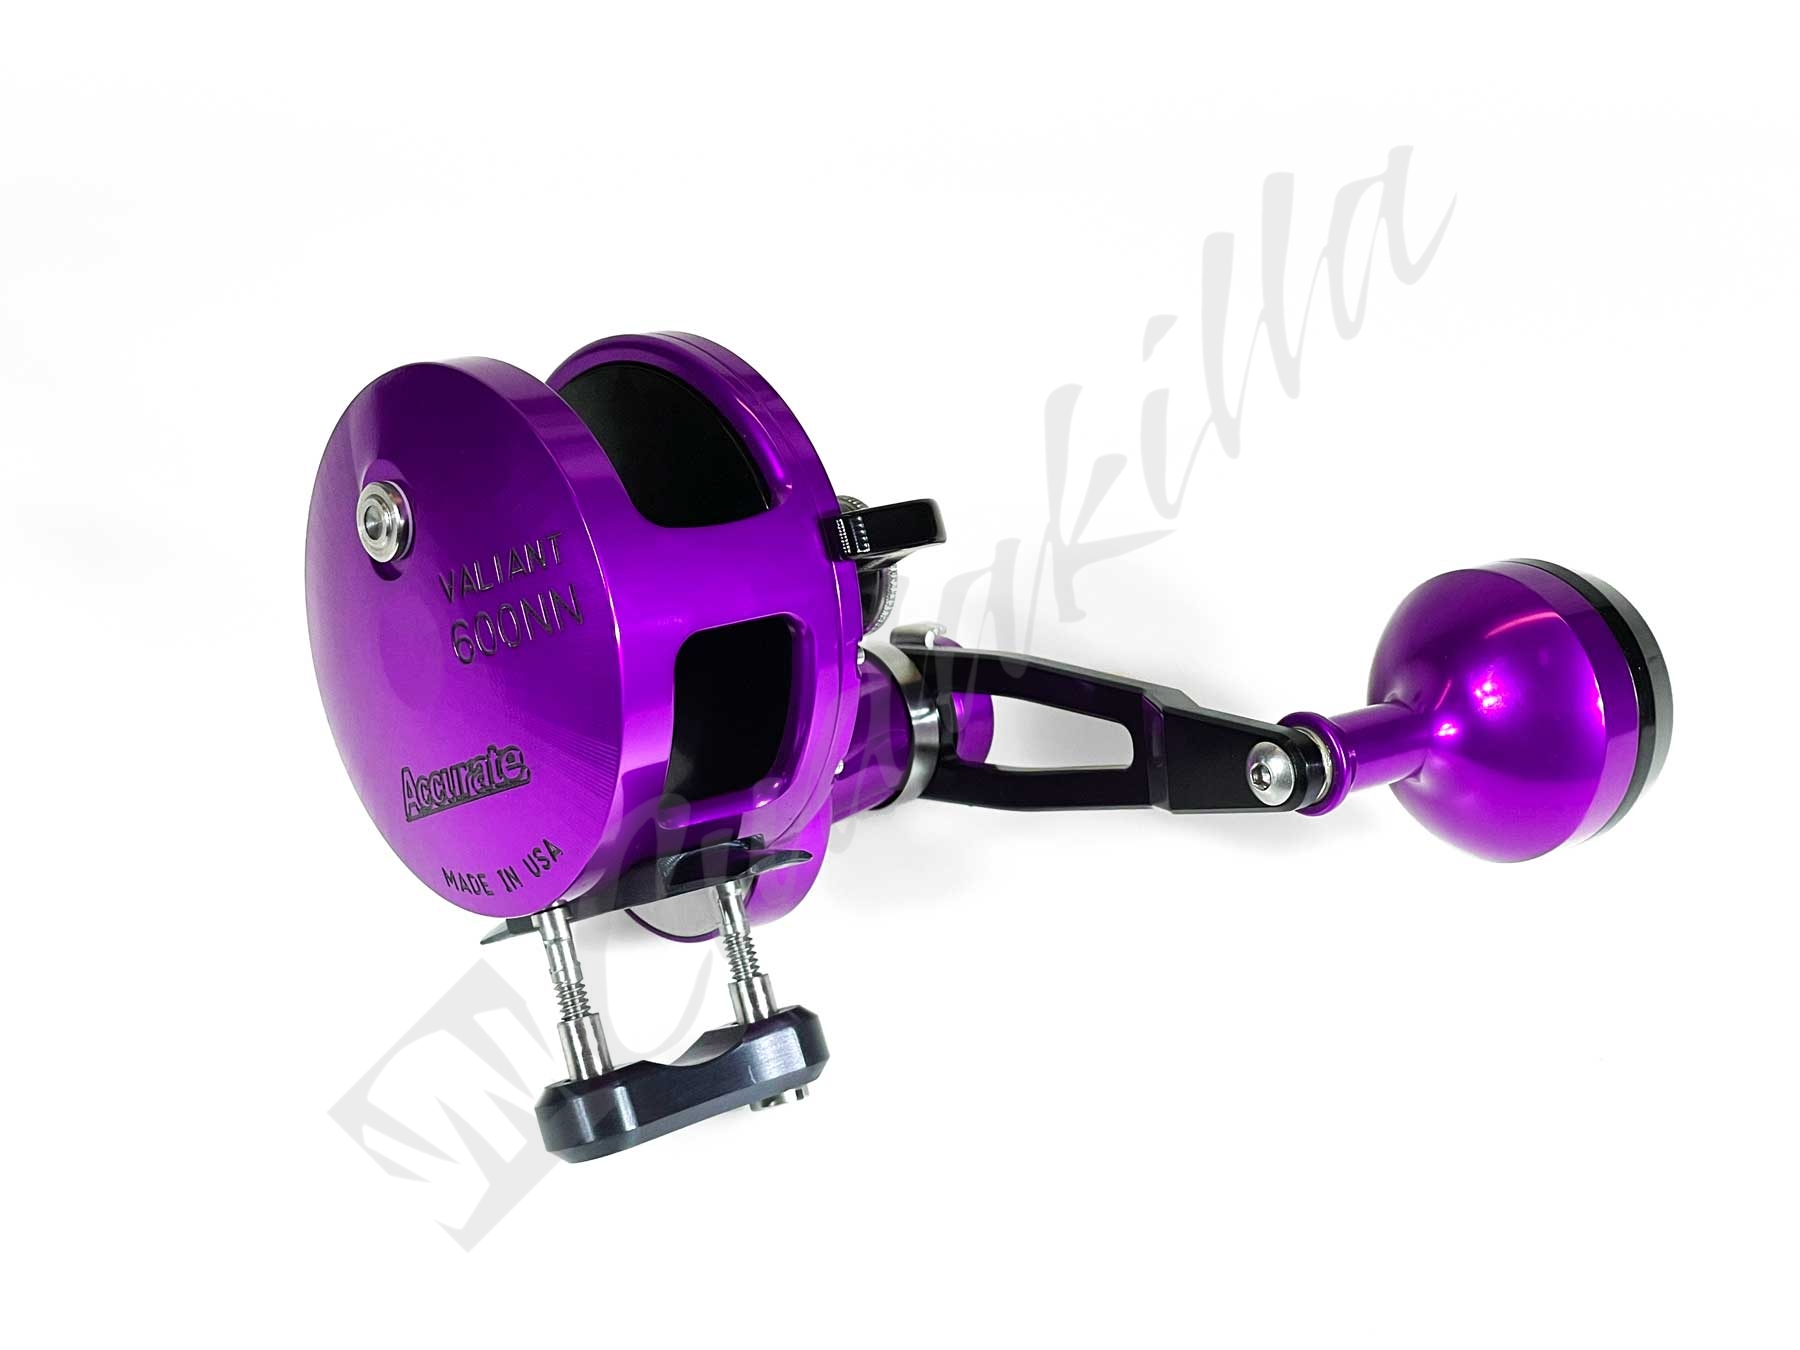 Accurate Valiant Slow Pitch Jigging Conventional Reel - BV-300-SPJ